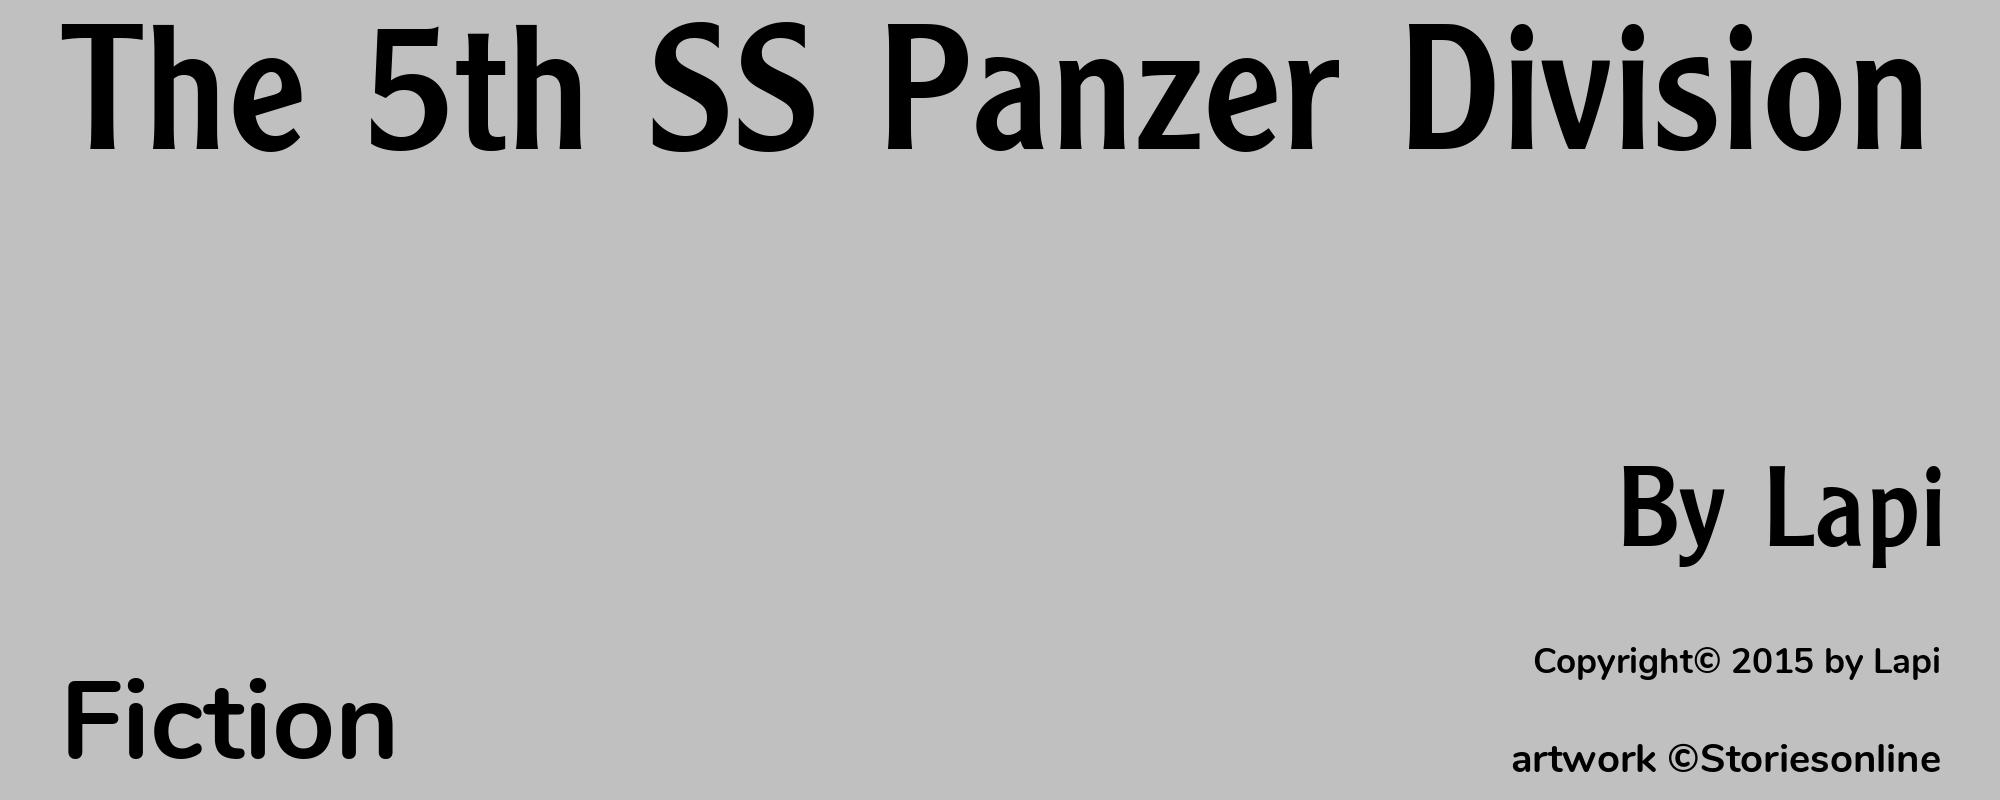 The 5th SS Panzer Division - Cover